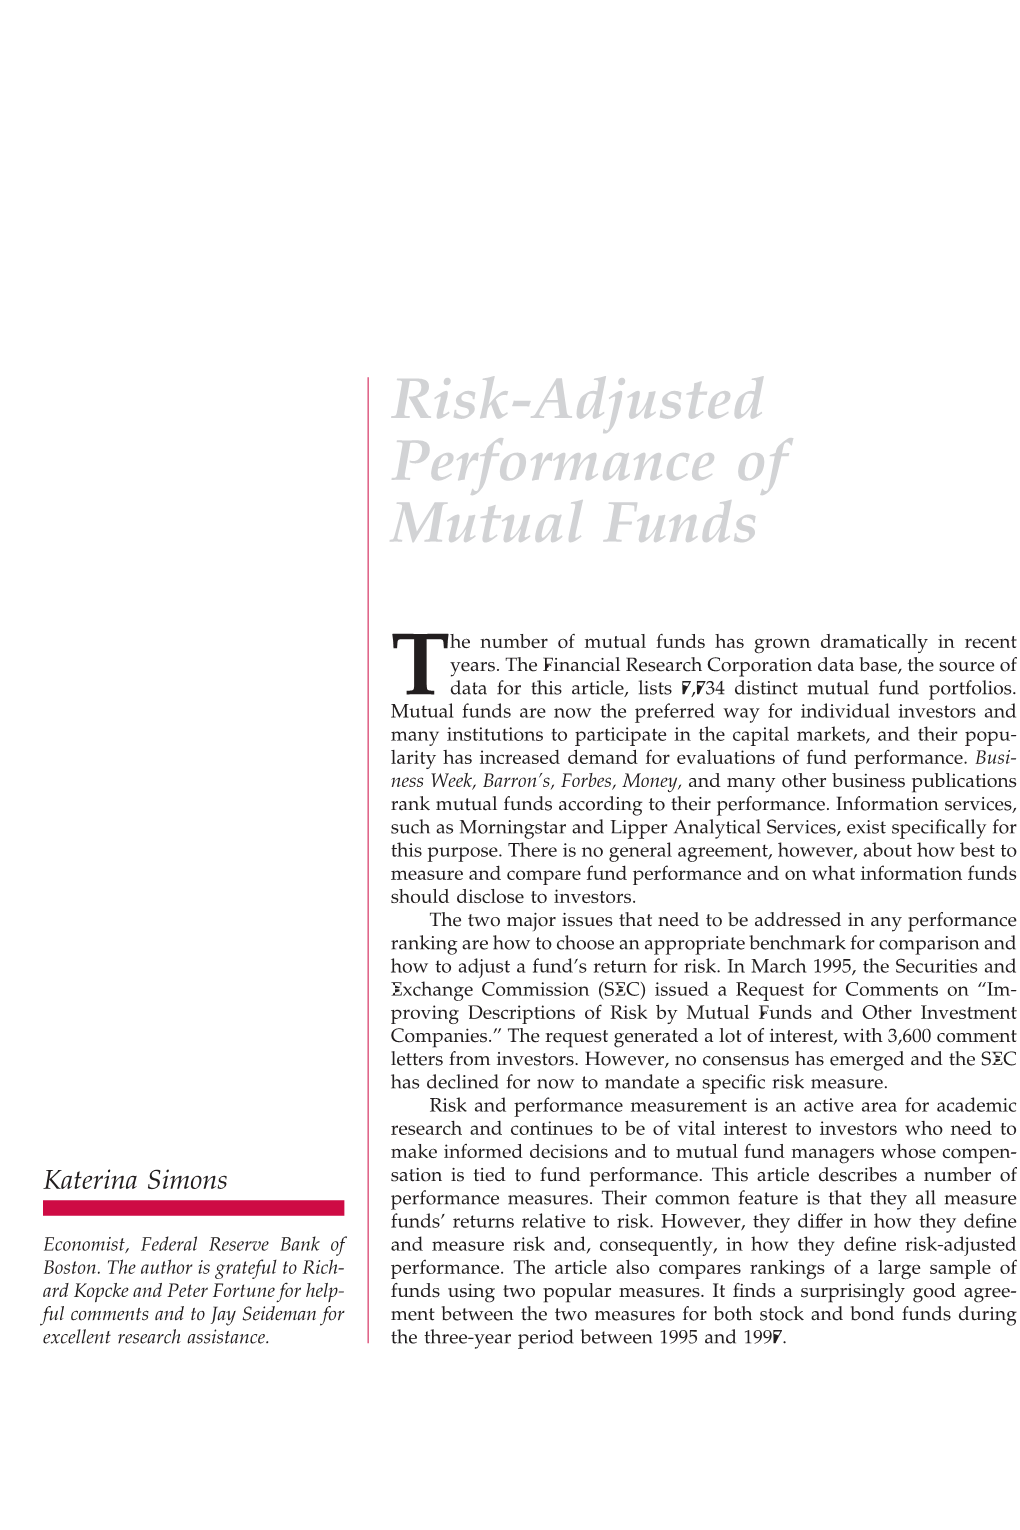 Risk-Adjusted Performance of Mutual Funds